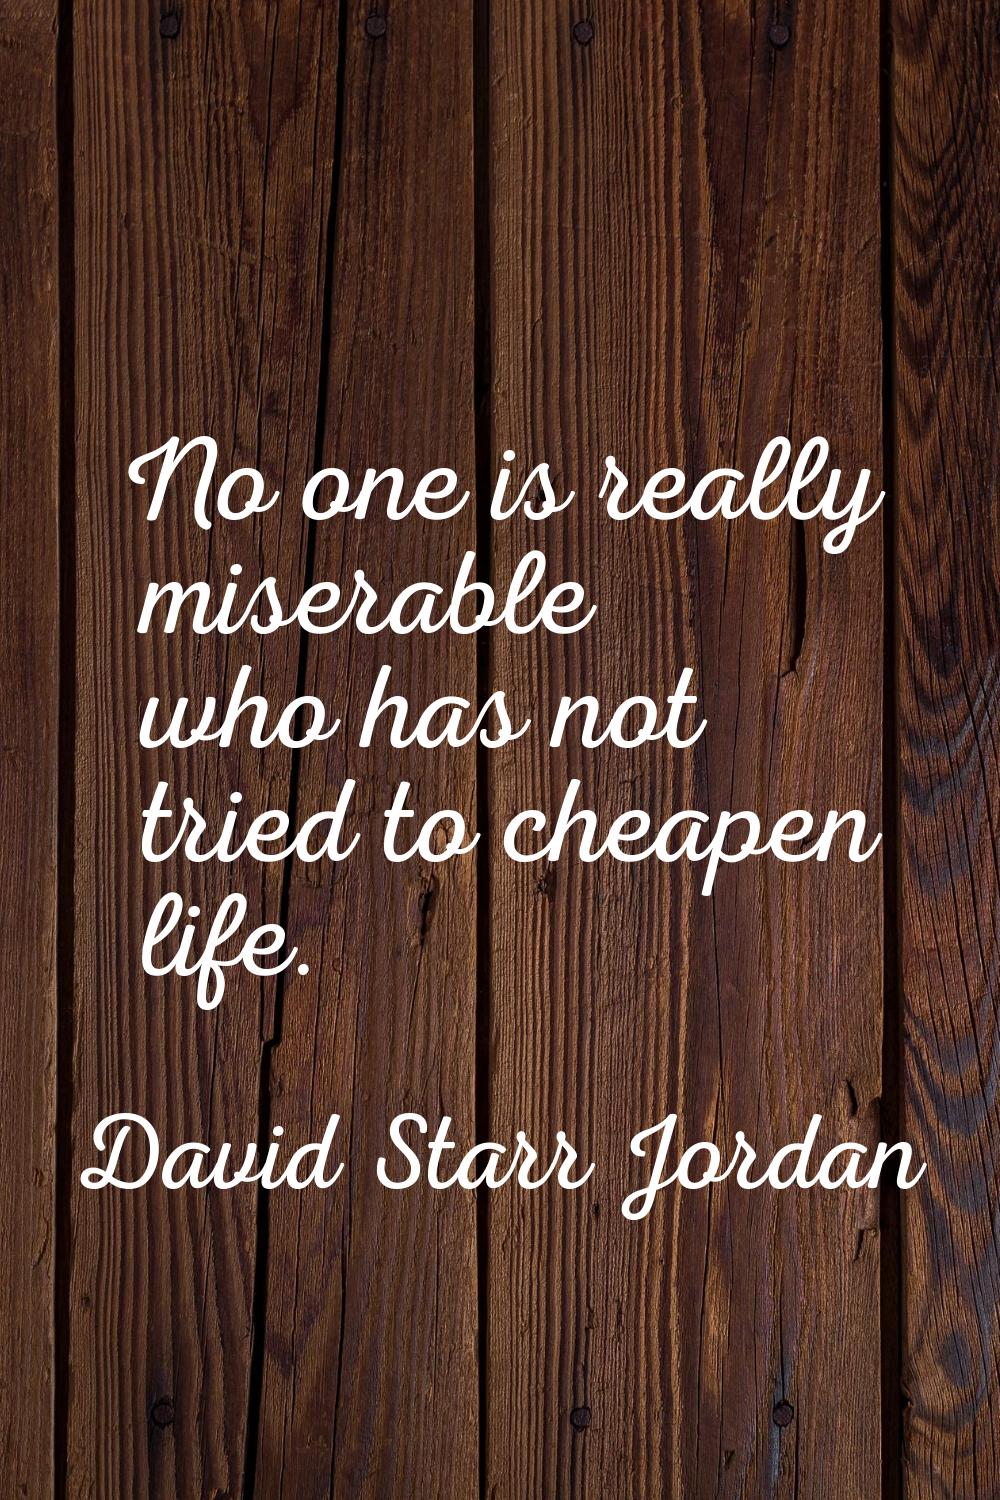 No one is really miserable who has not tried to cheapen life.